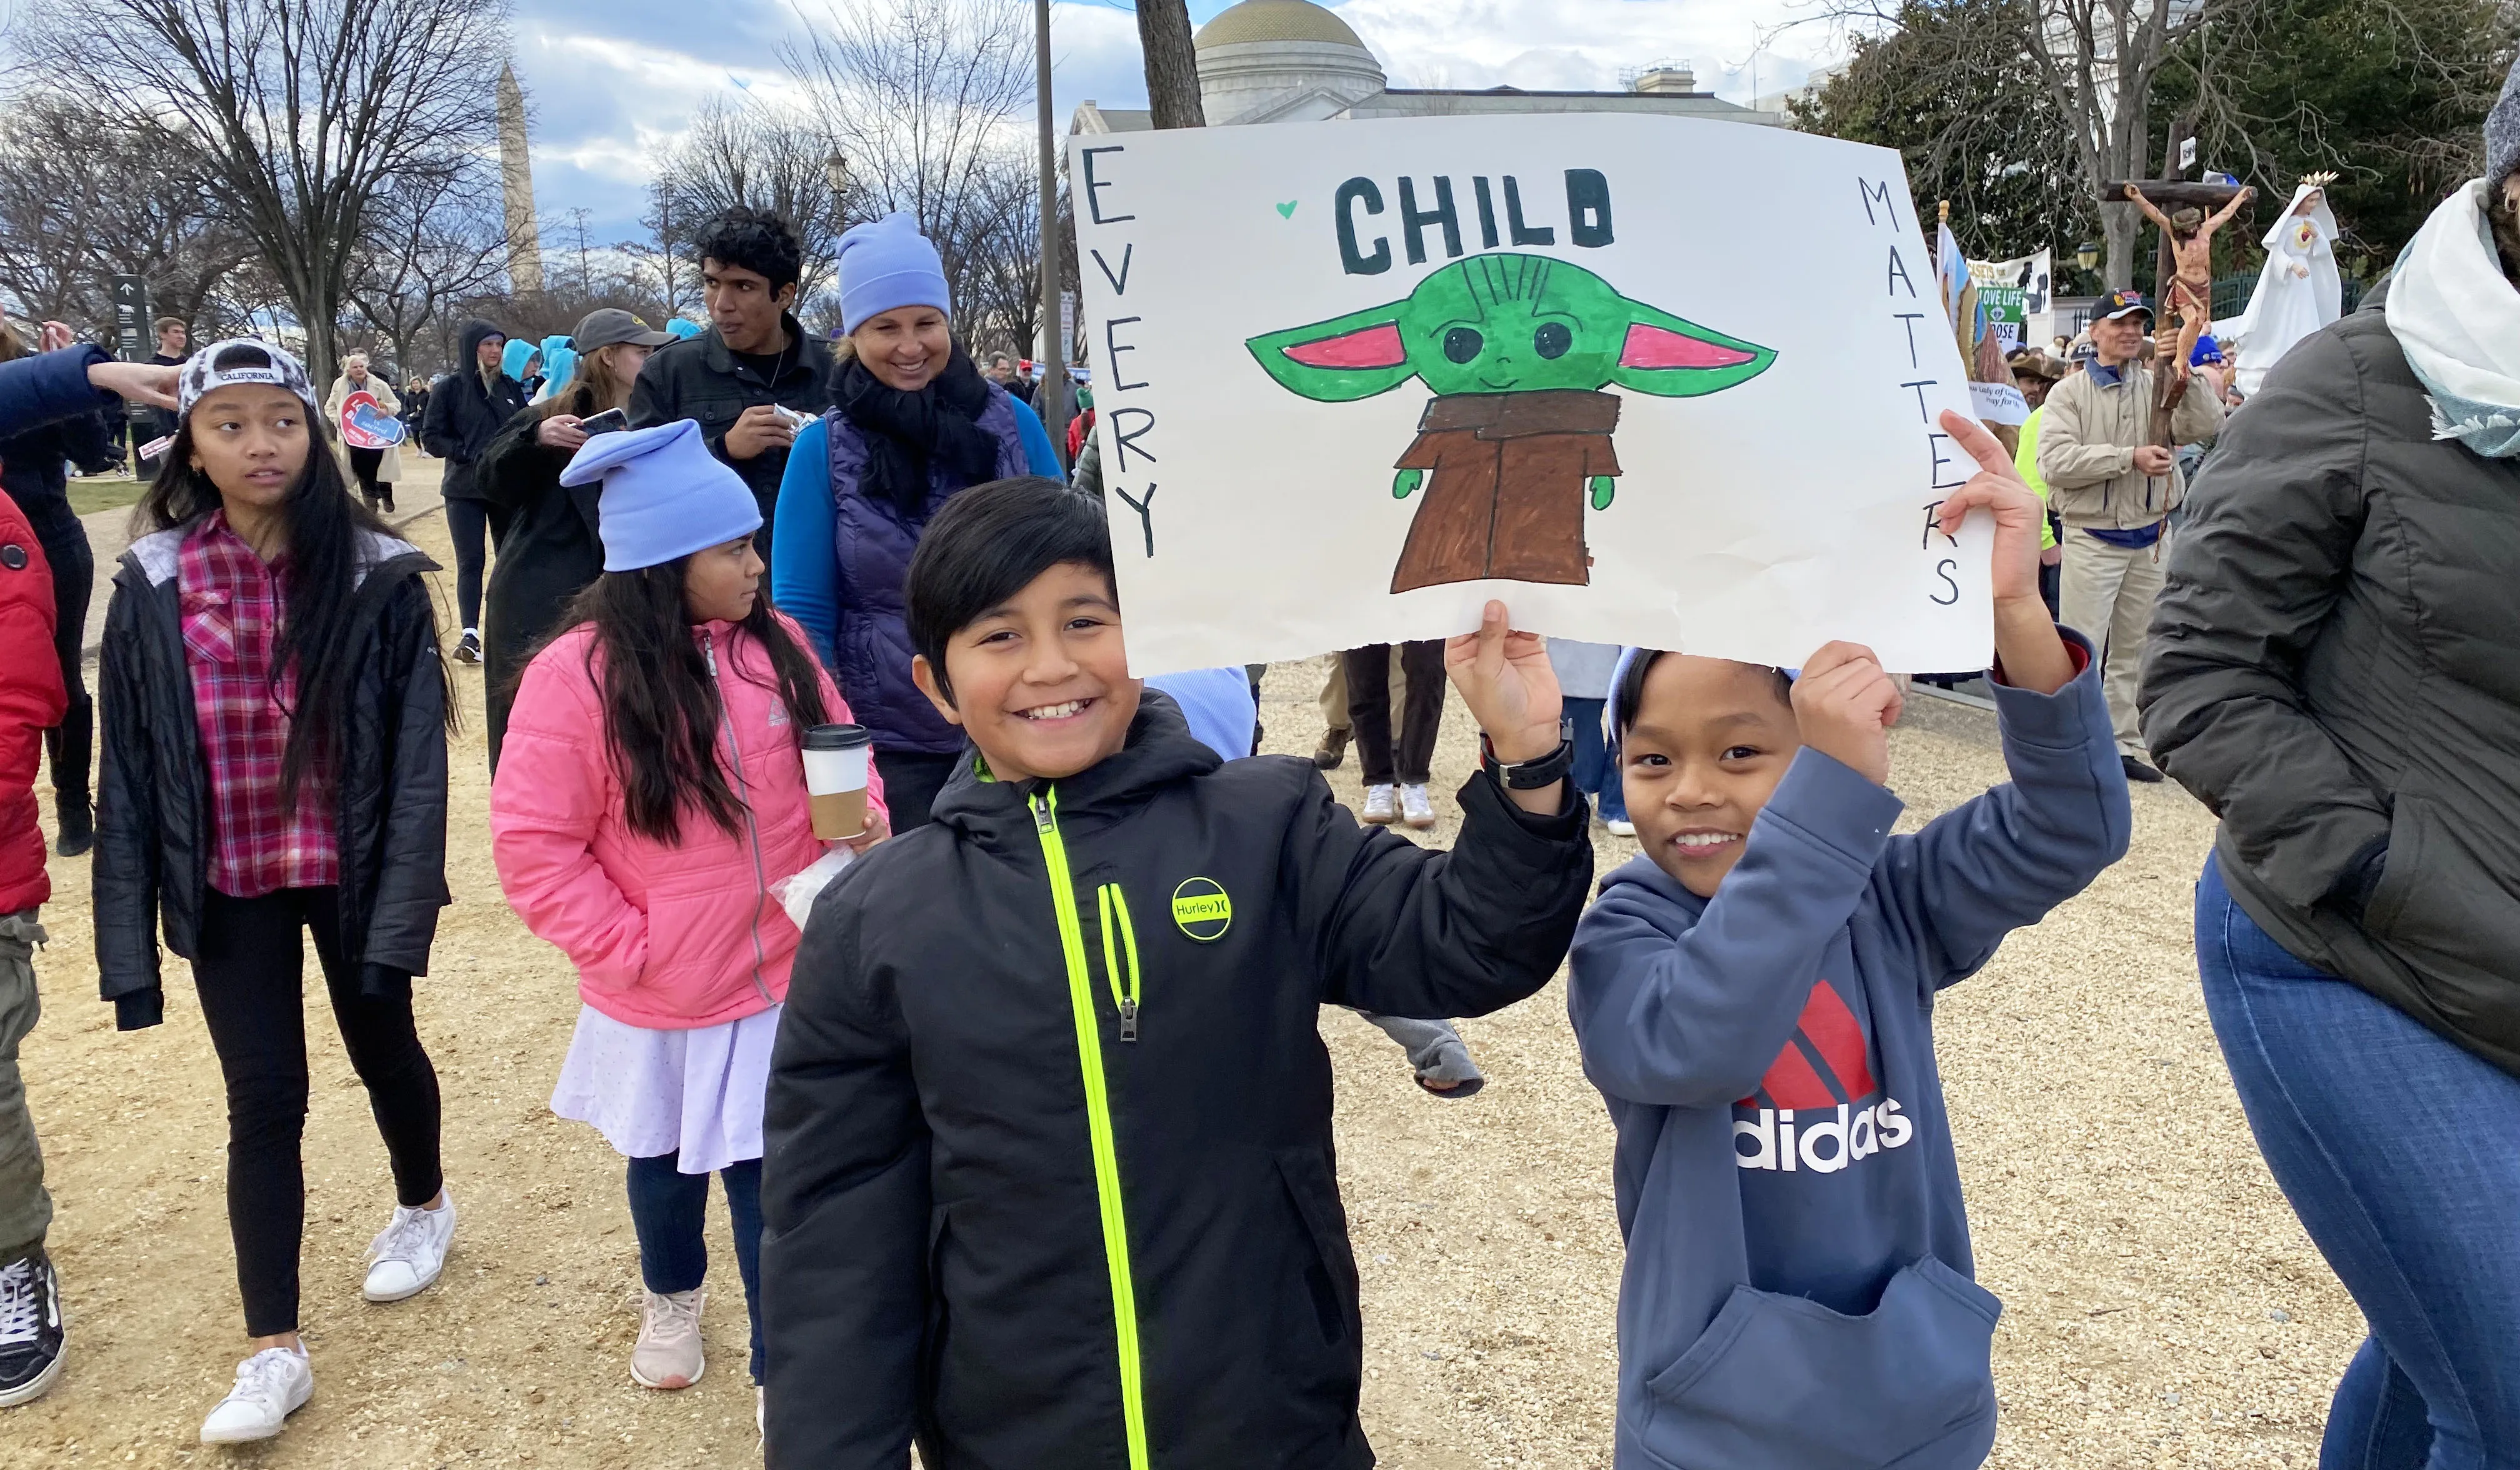 Young pro-life marchers carry Baby Yoda signs at the March for Life in Washington, D.C., on Jan. 20, 2023. Katie Yoder/CNA